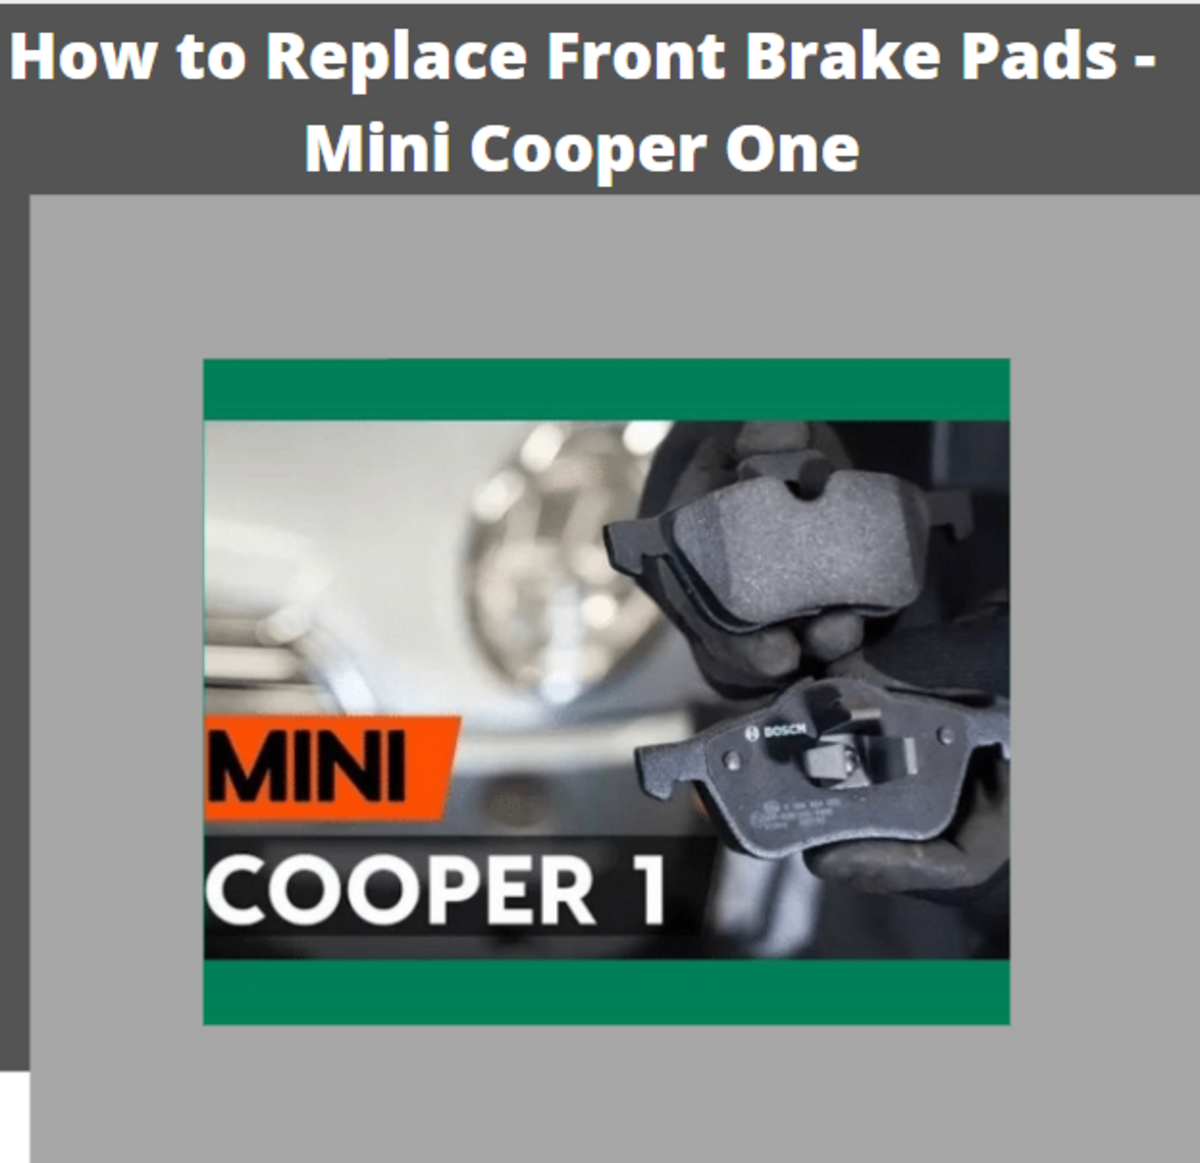 How to Replace Front Brake Pads: Mini Cooper One